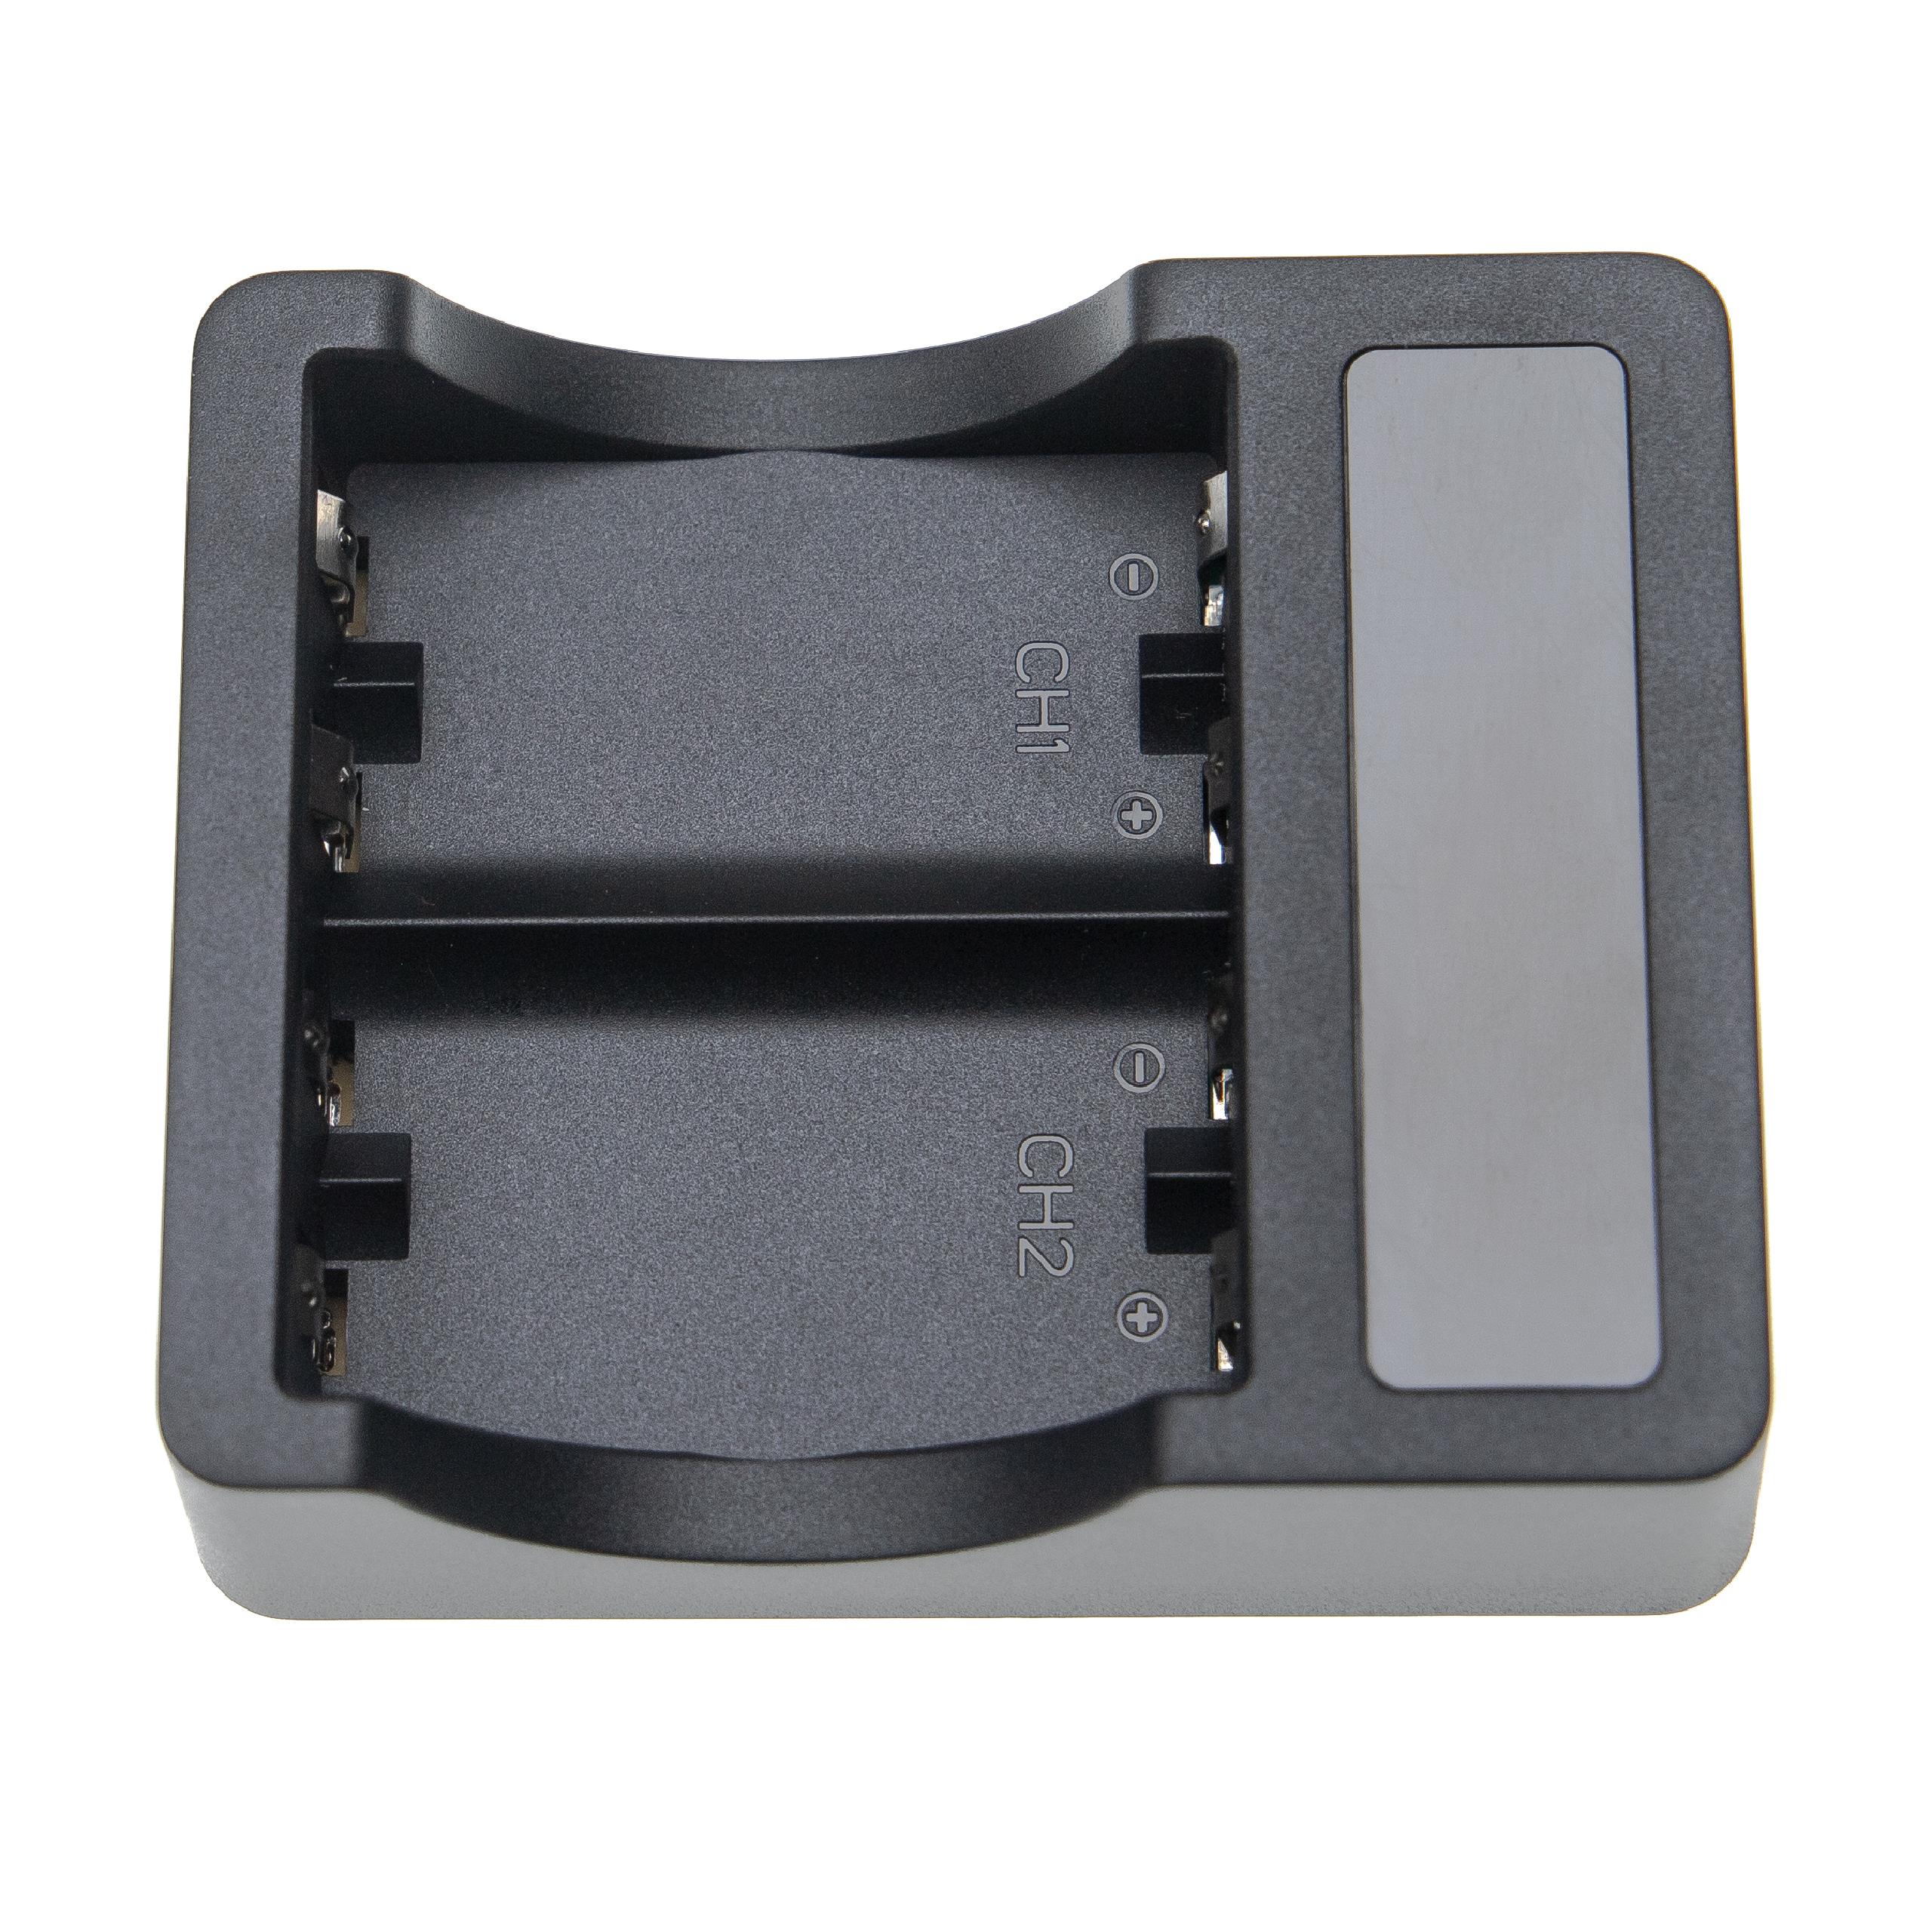 Dual Charging Station suitable for BX01 , Microsoft Microsoft Controller etc. - Charging Cradle + Lead